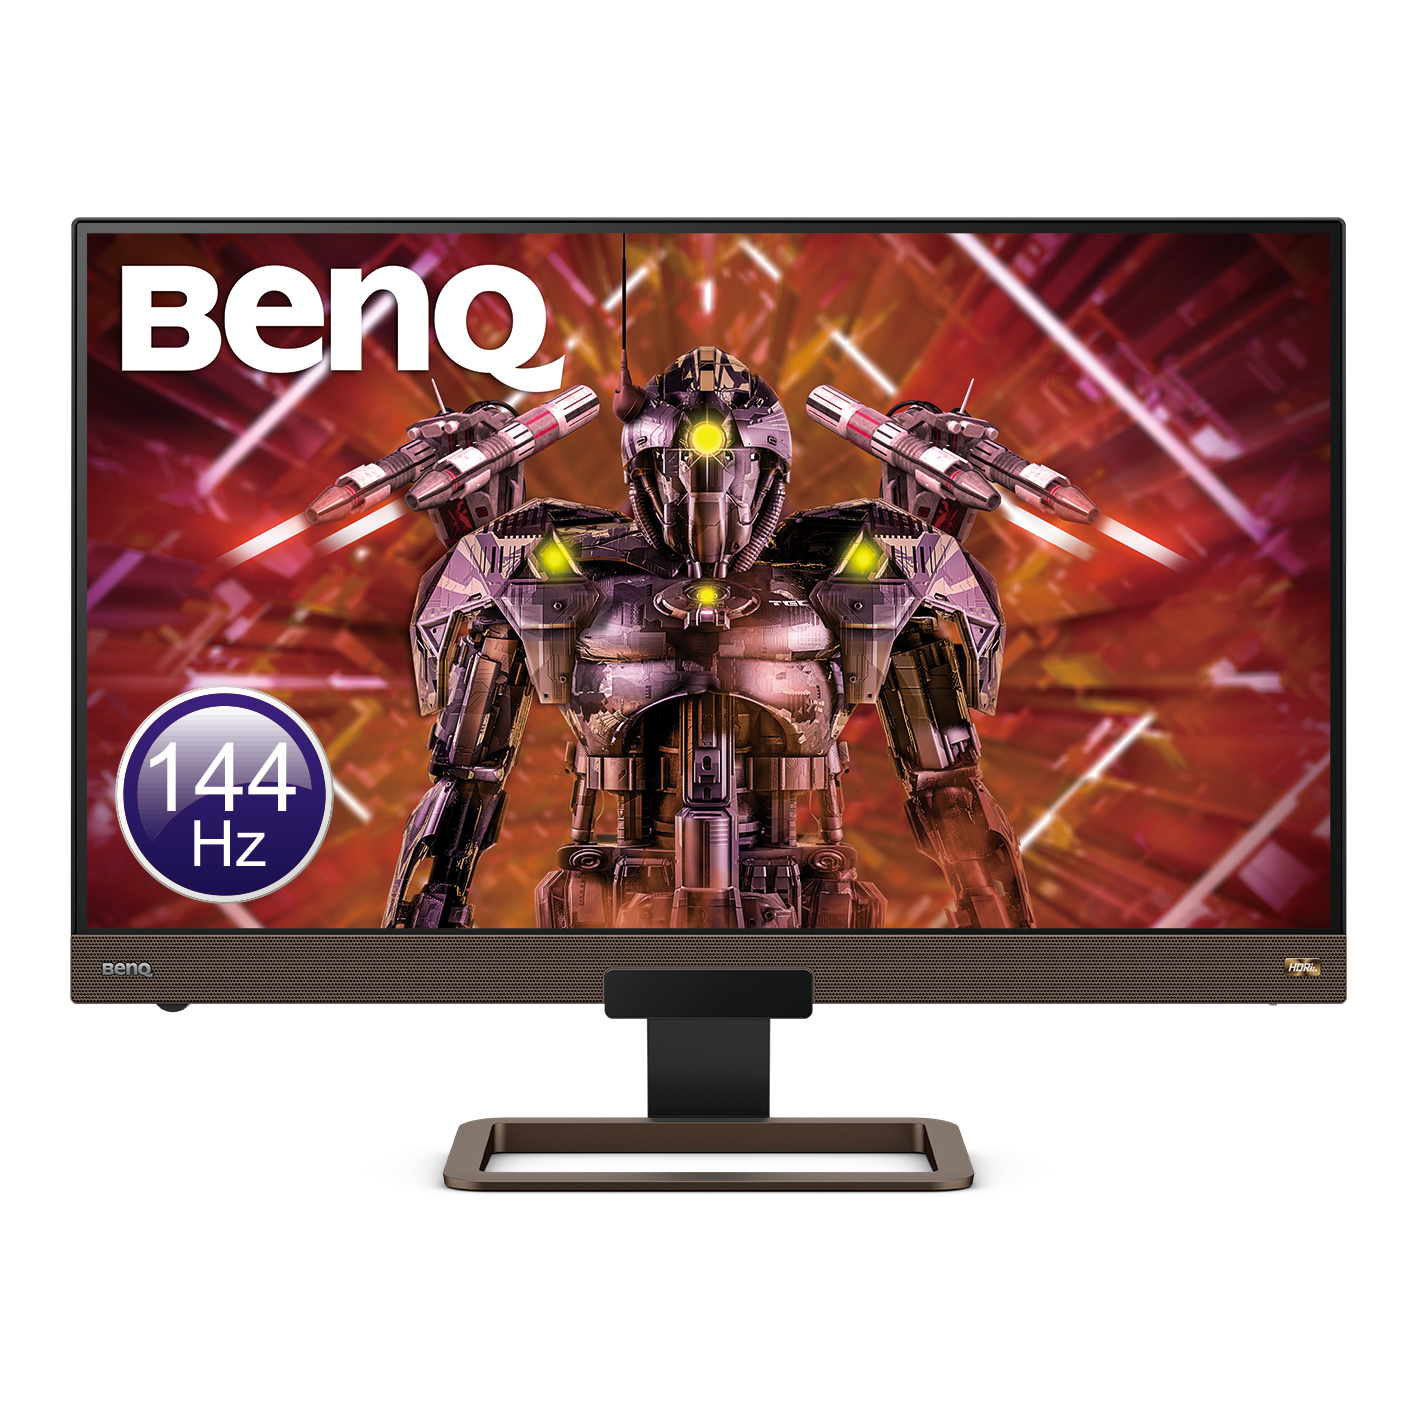 the monitor with a picture of robot as screen, a beno logo on the top left coner and a 144HZ icon on the left bottom coner